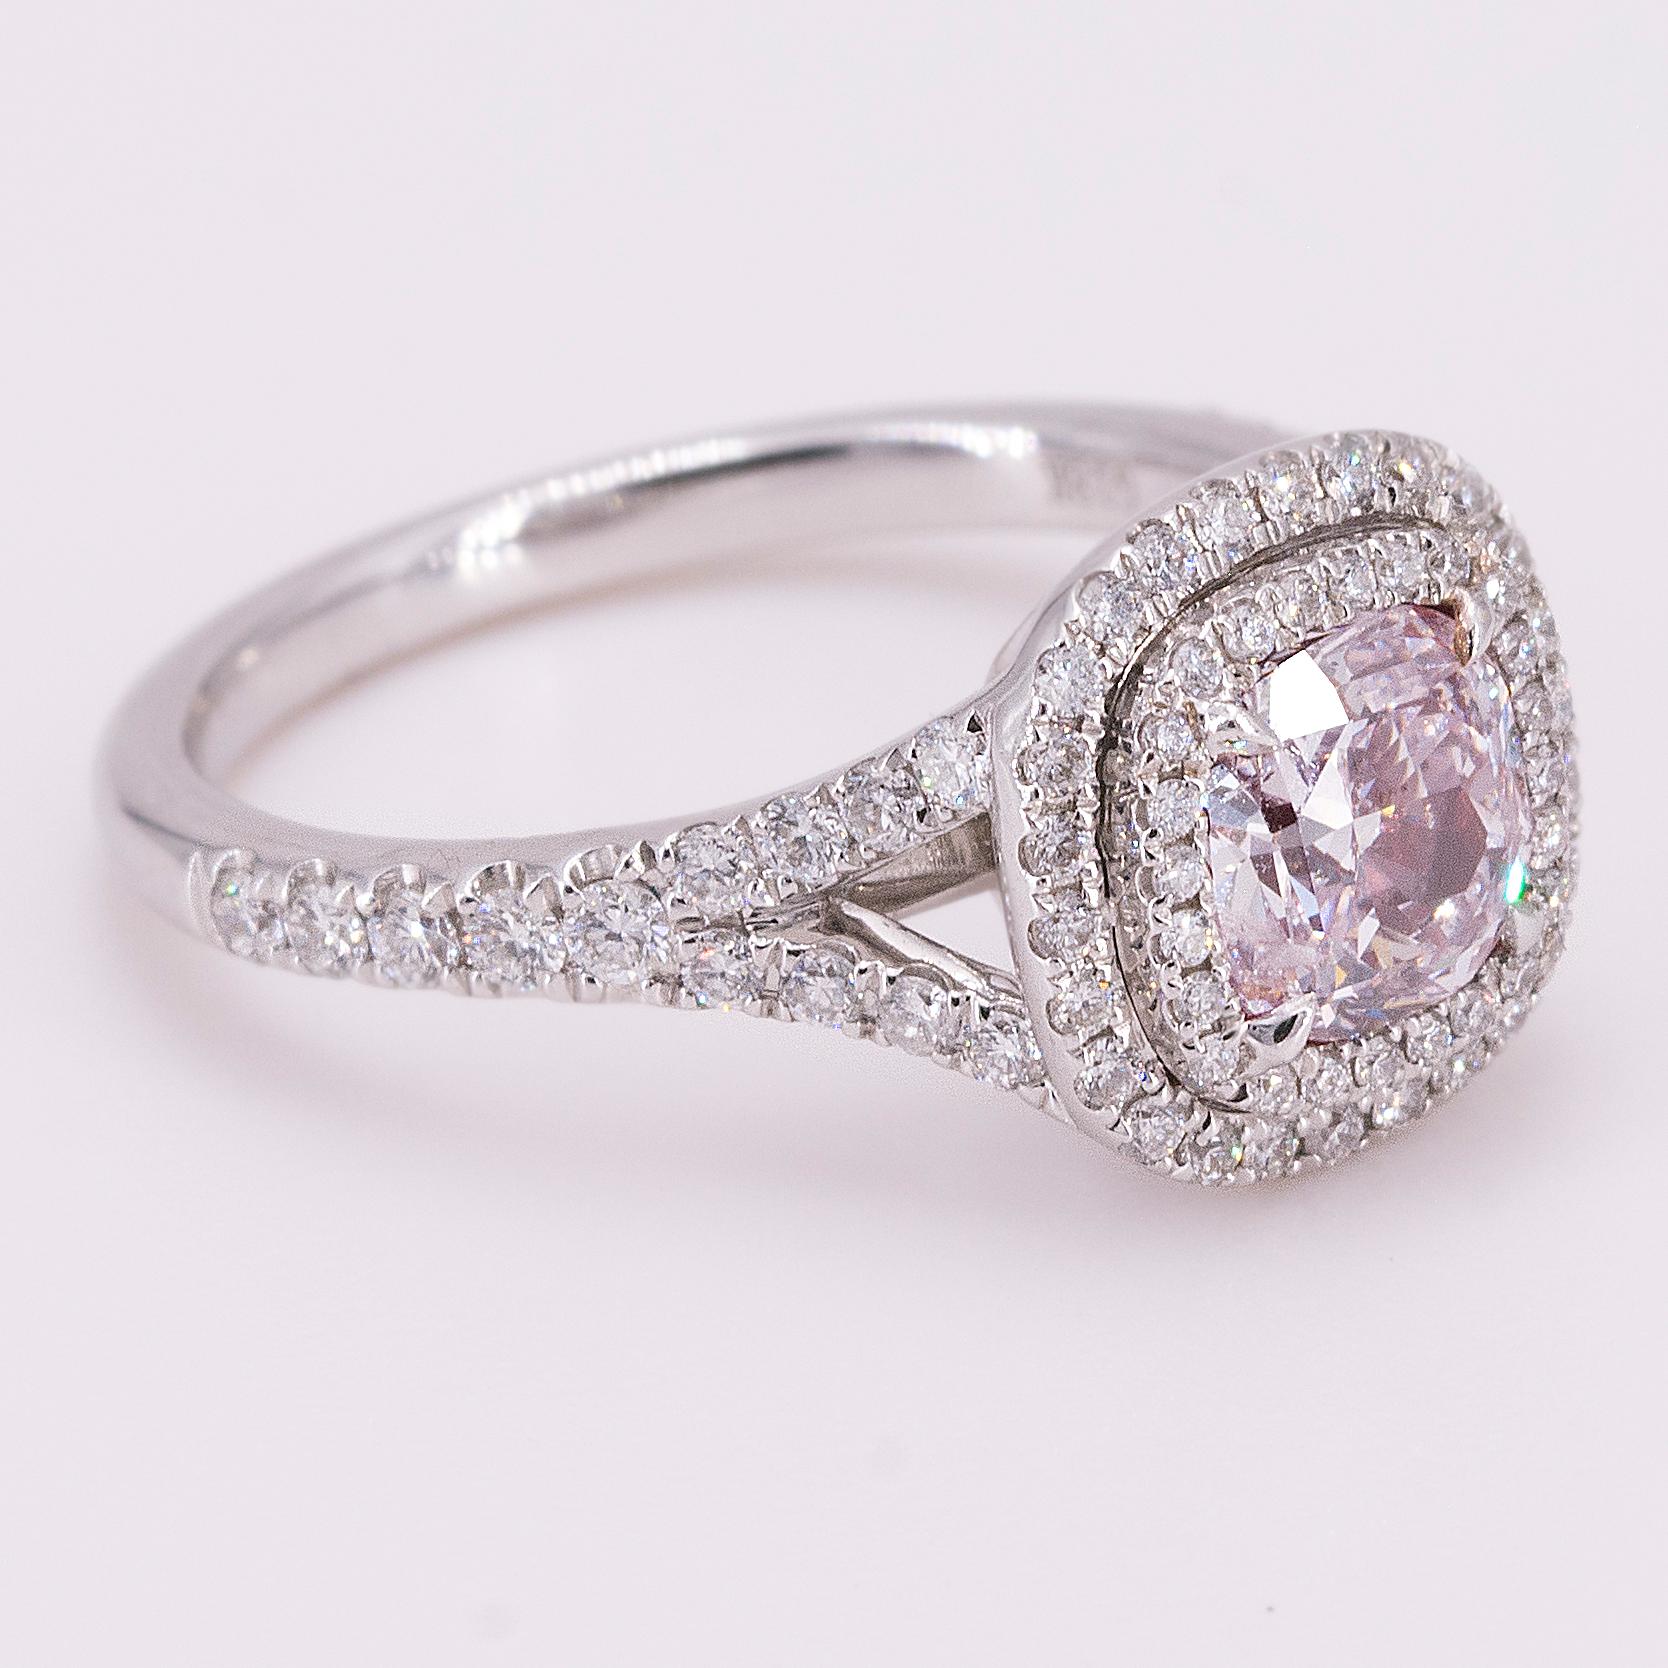 18k Ring with GIA 1.01 carat light pink cushion cut diamond and 76 round brilliant diamonds weighing 0.53 caarats. 4.48g